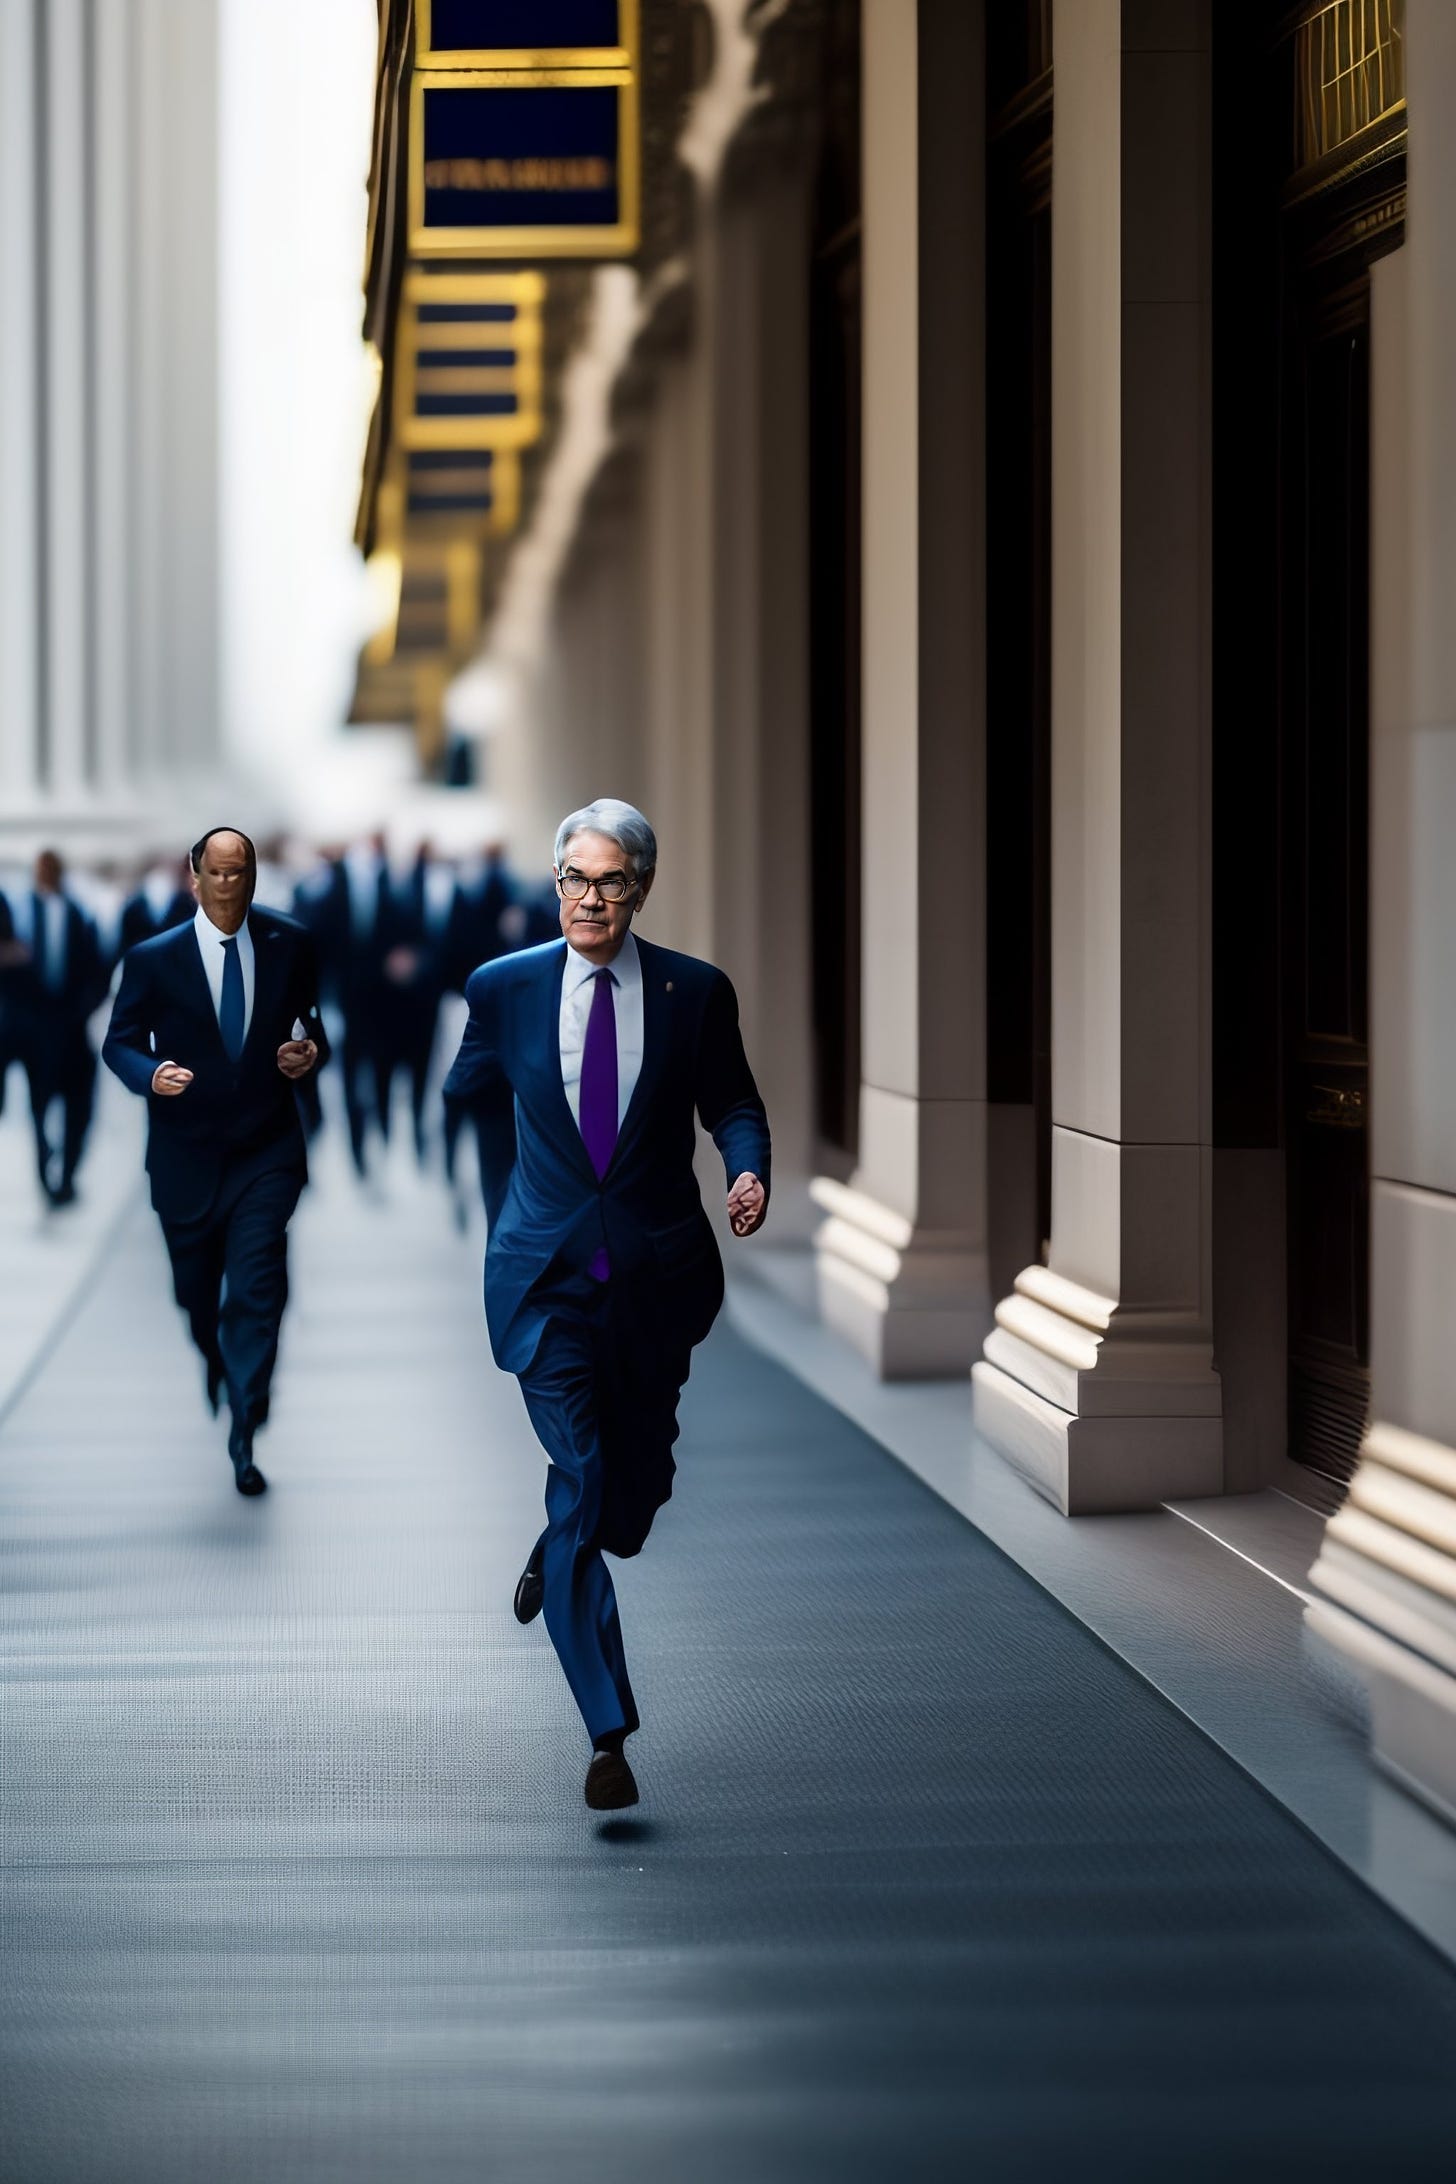 people chasing Jerome Powell in the new age of bank runs